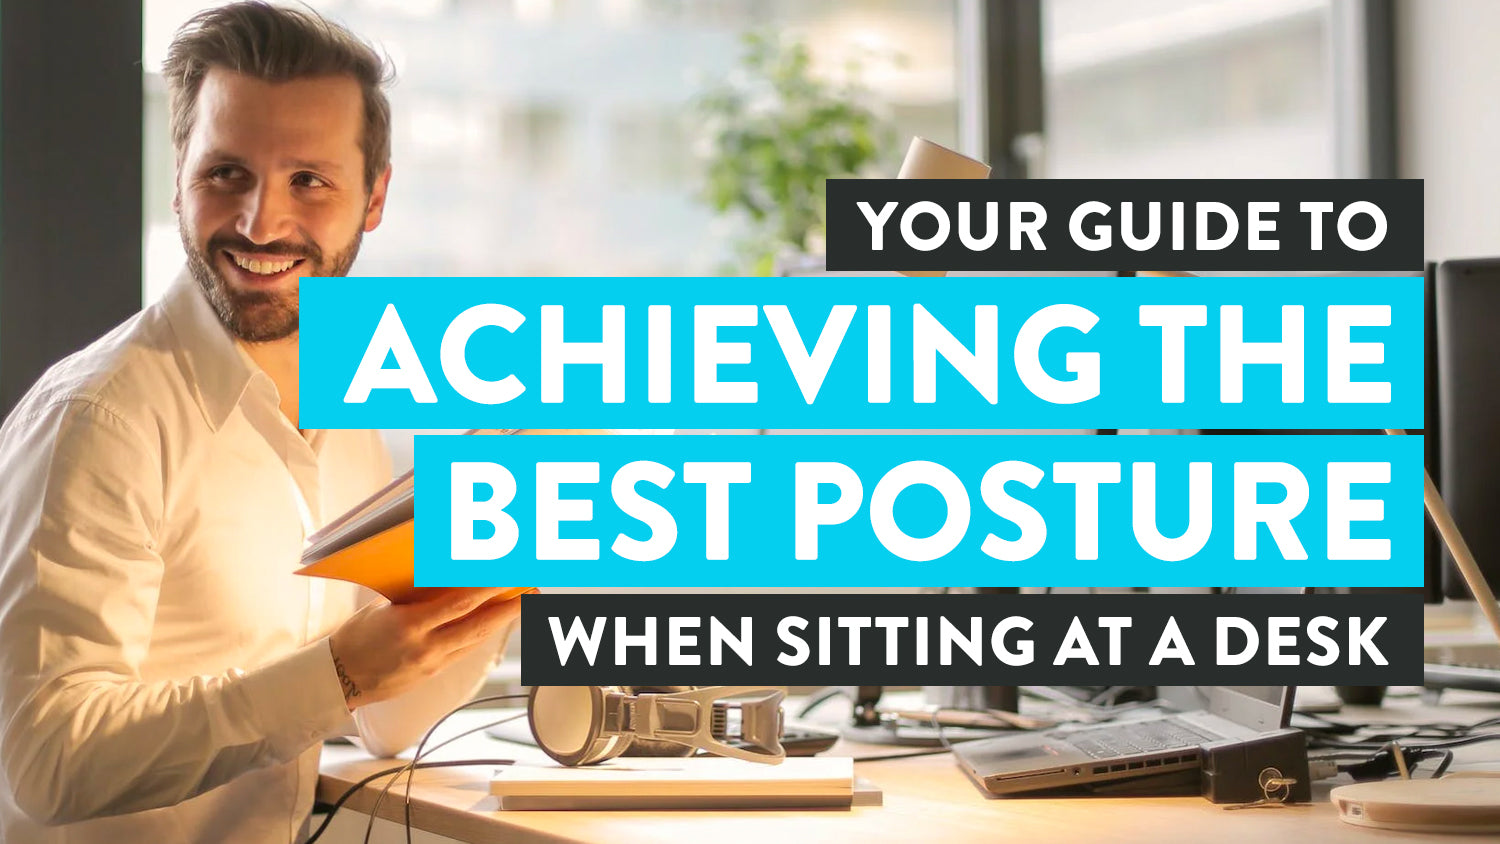 http://desky.com.au/cdn/shop/articles/Your-Guide-To-Achieving-The-Best-Posture-When-Sitting-At-A-Desk.jpg?v=1689772998